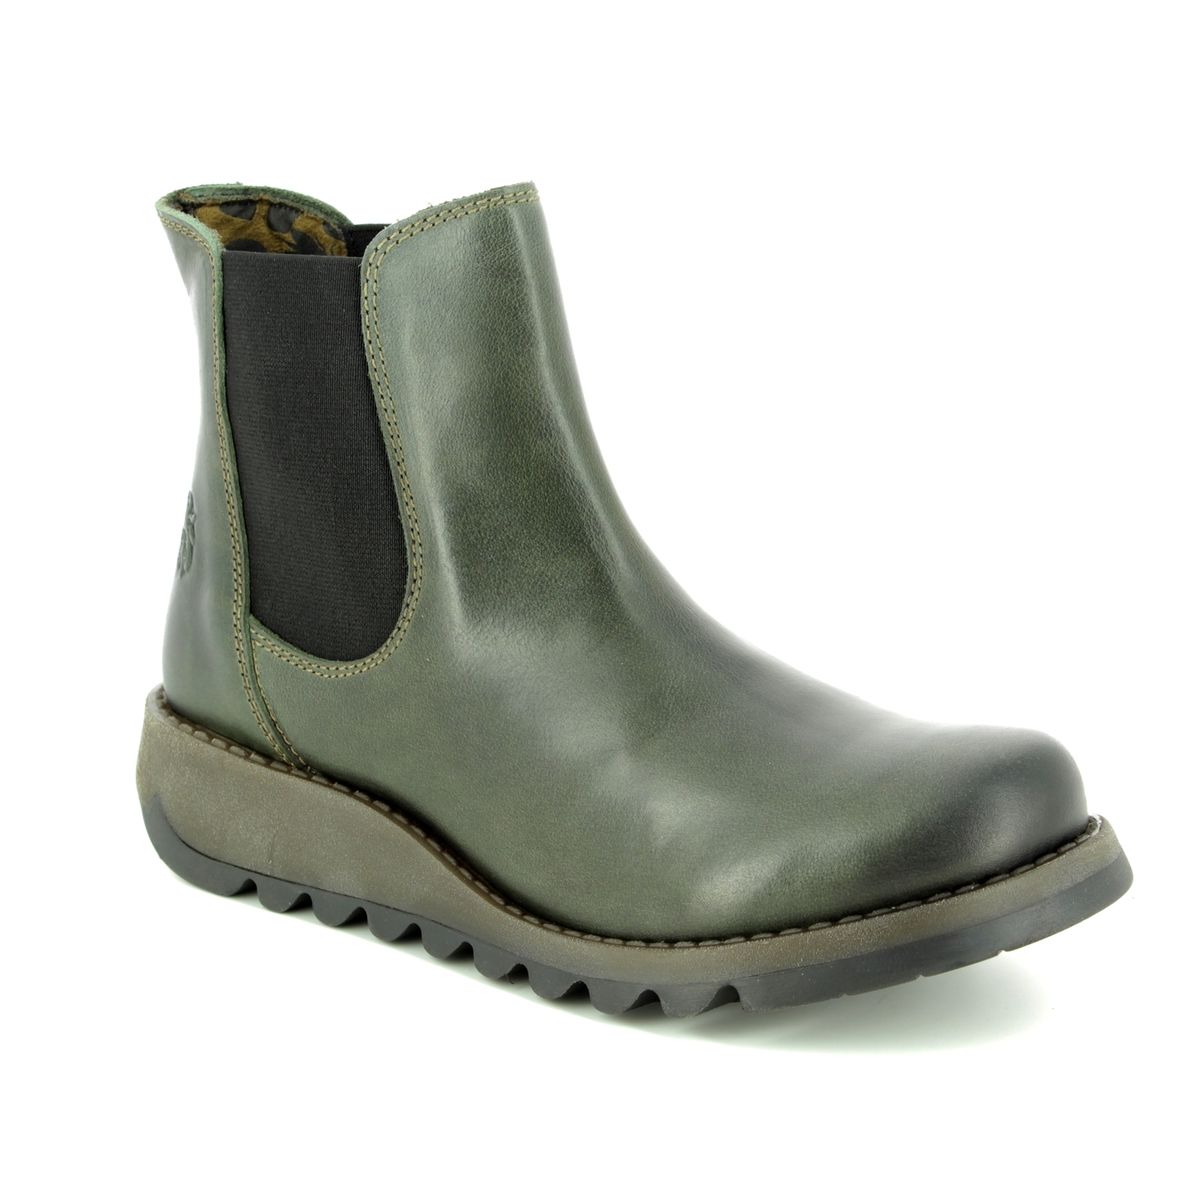 Fly London Salv Diesel Leather Womens Ankle Boots P143195 In Size 40 In Plain Diesel Leather